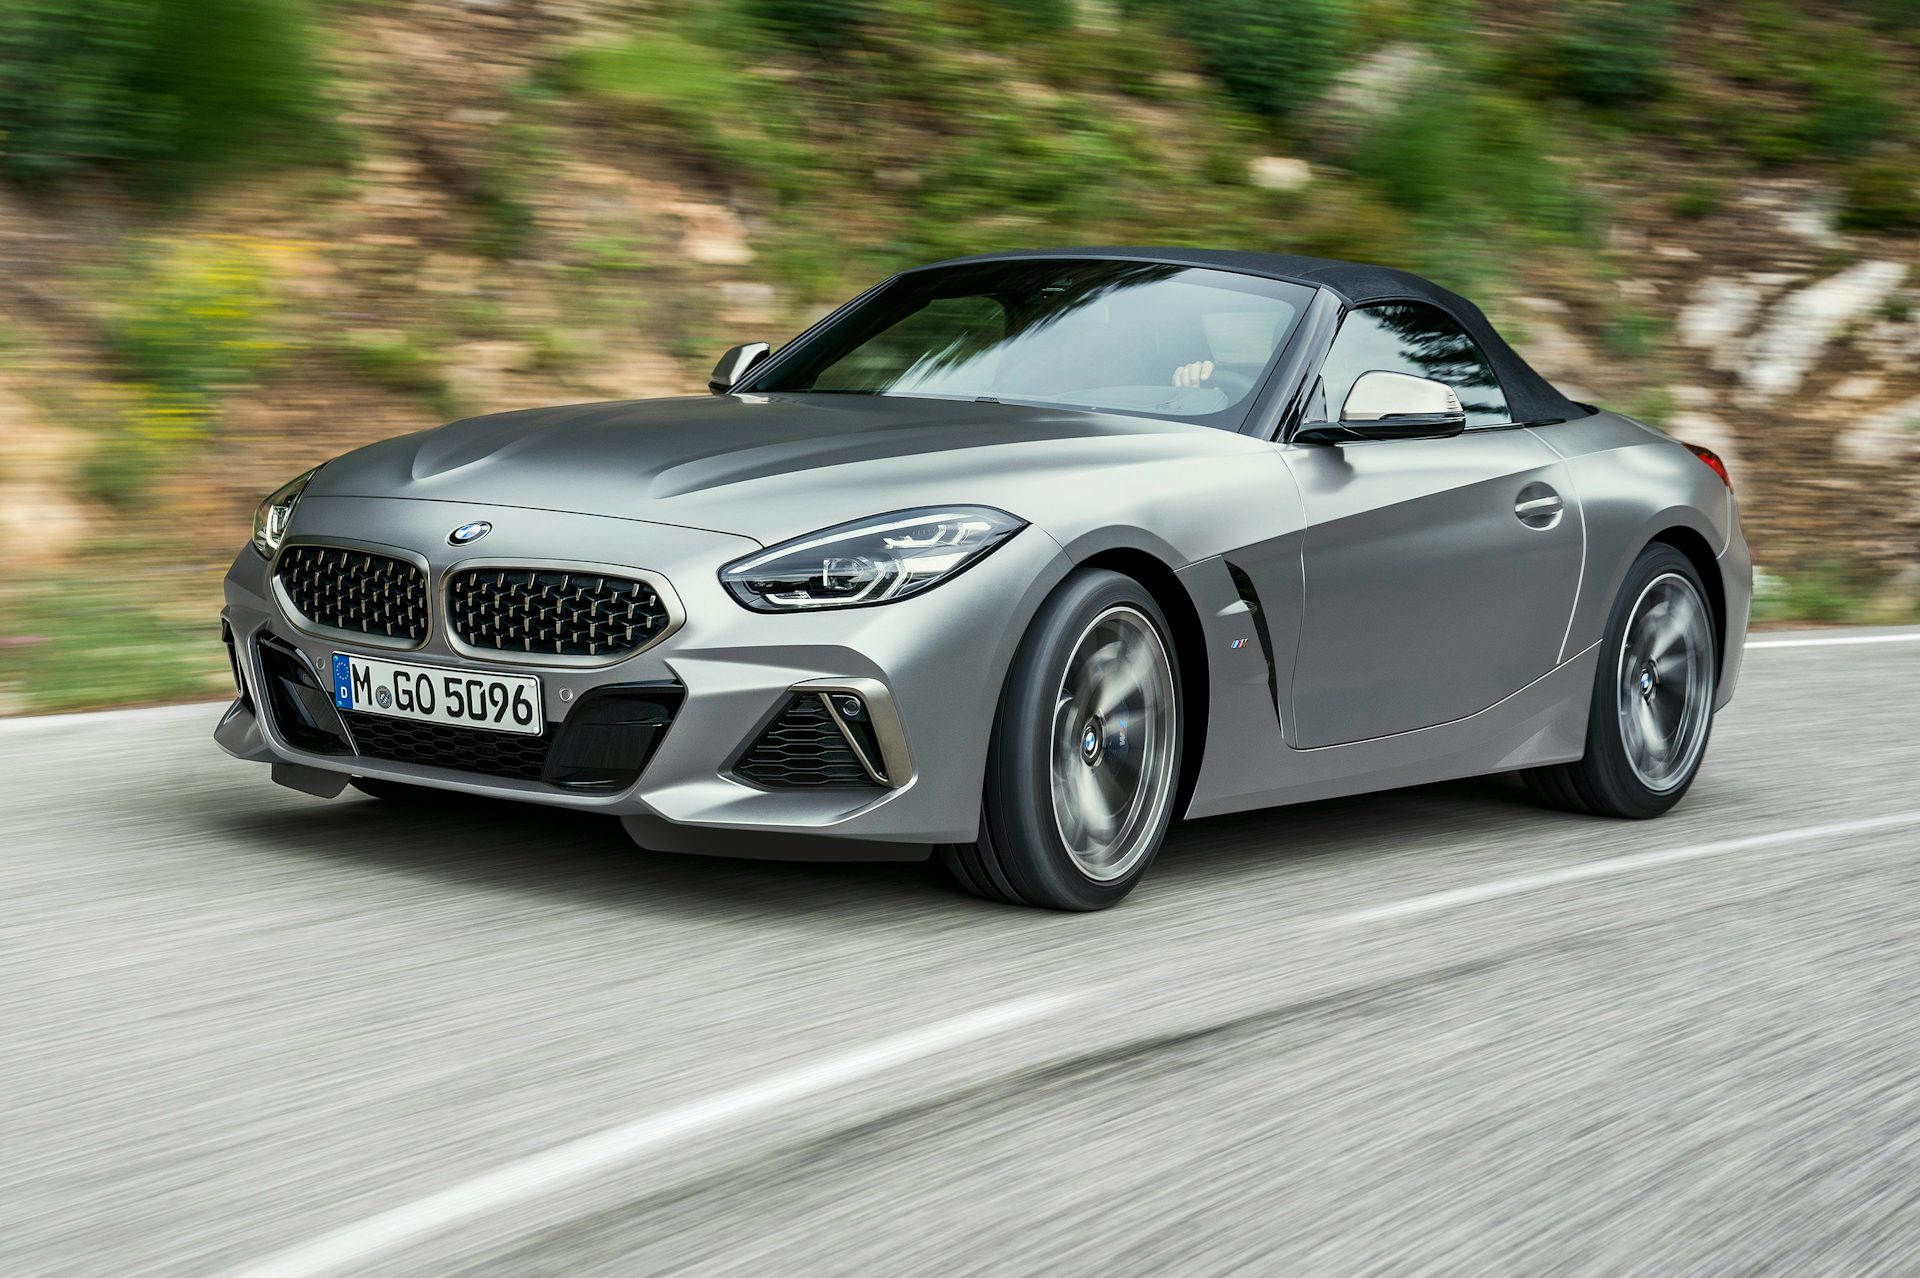 2018 BMW Z4 roadster price, specs and release date | carwow